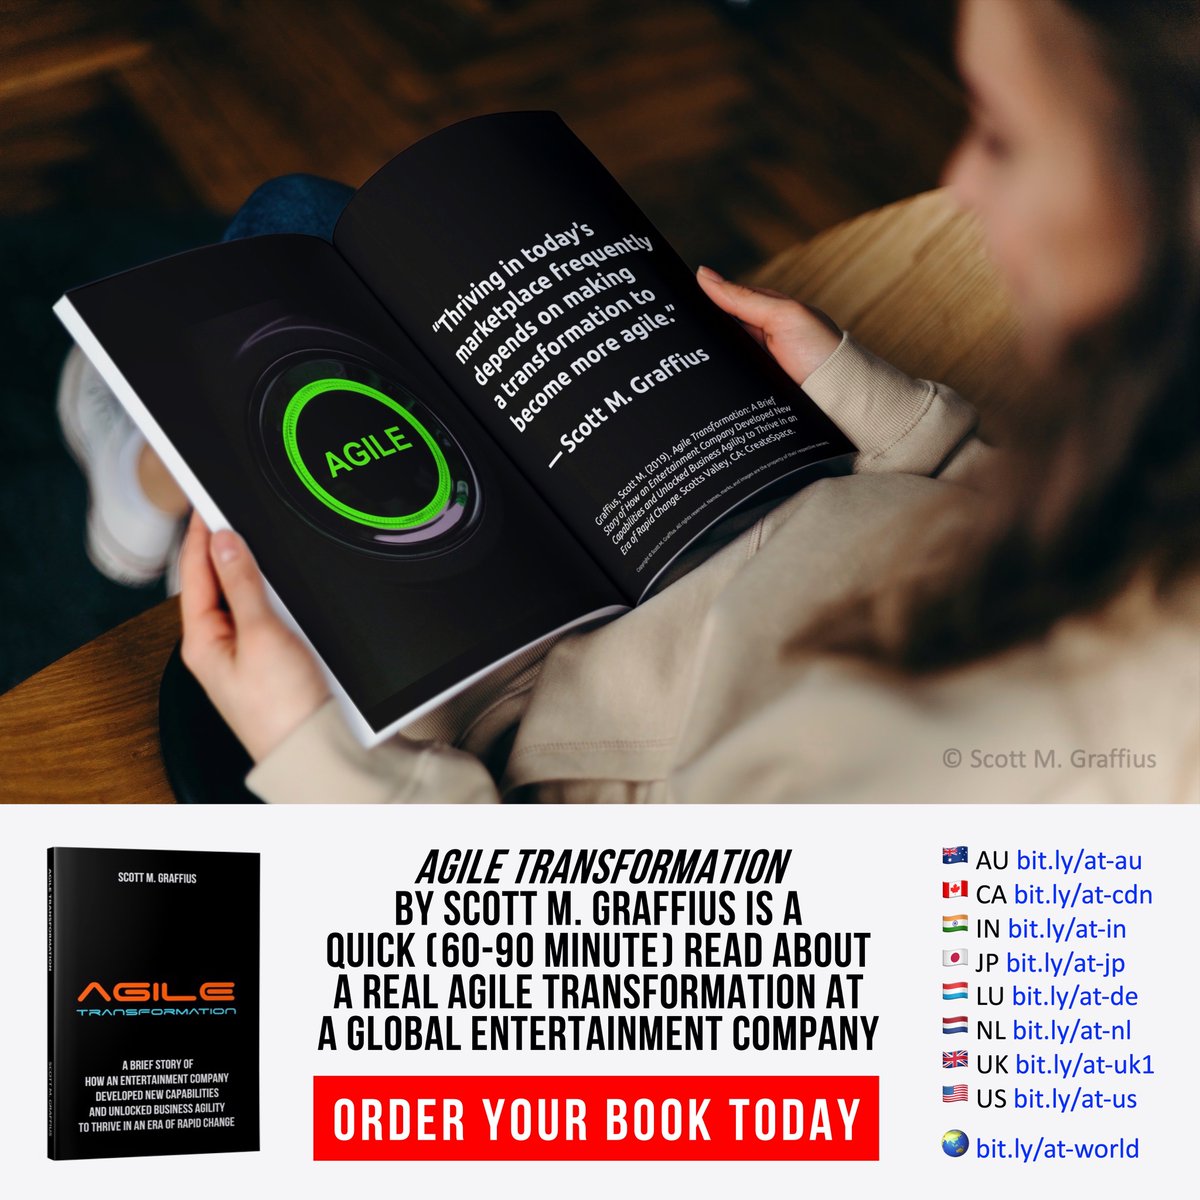 “Thriving in today’s marketplace frequently depends on making a transformation to become more agile.” — Scott M. Graffius, Agile Transformation Order your #AgileTransformationBook today: 🇺🇸 bit.ly/at-us 🇬🇧 bit.ly/at-uk1 🌍 bit.ly/at-world #Agile